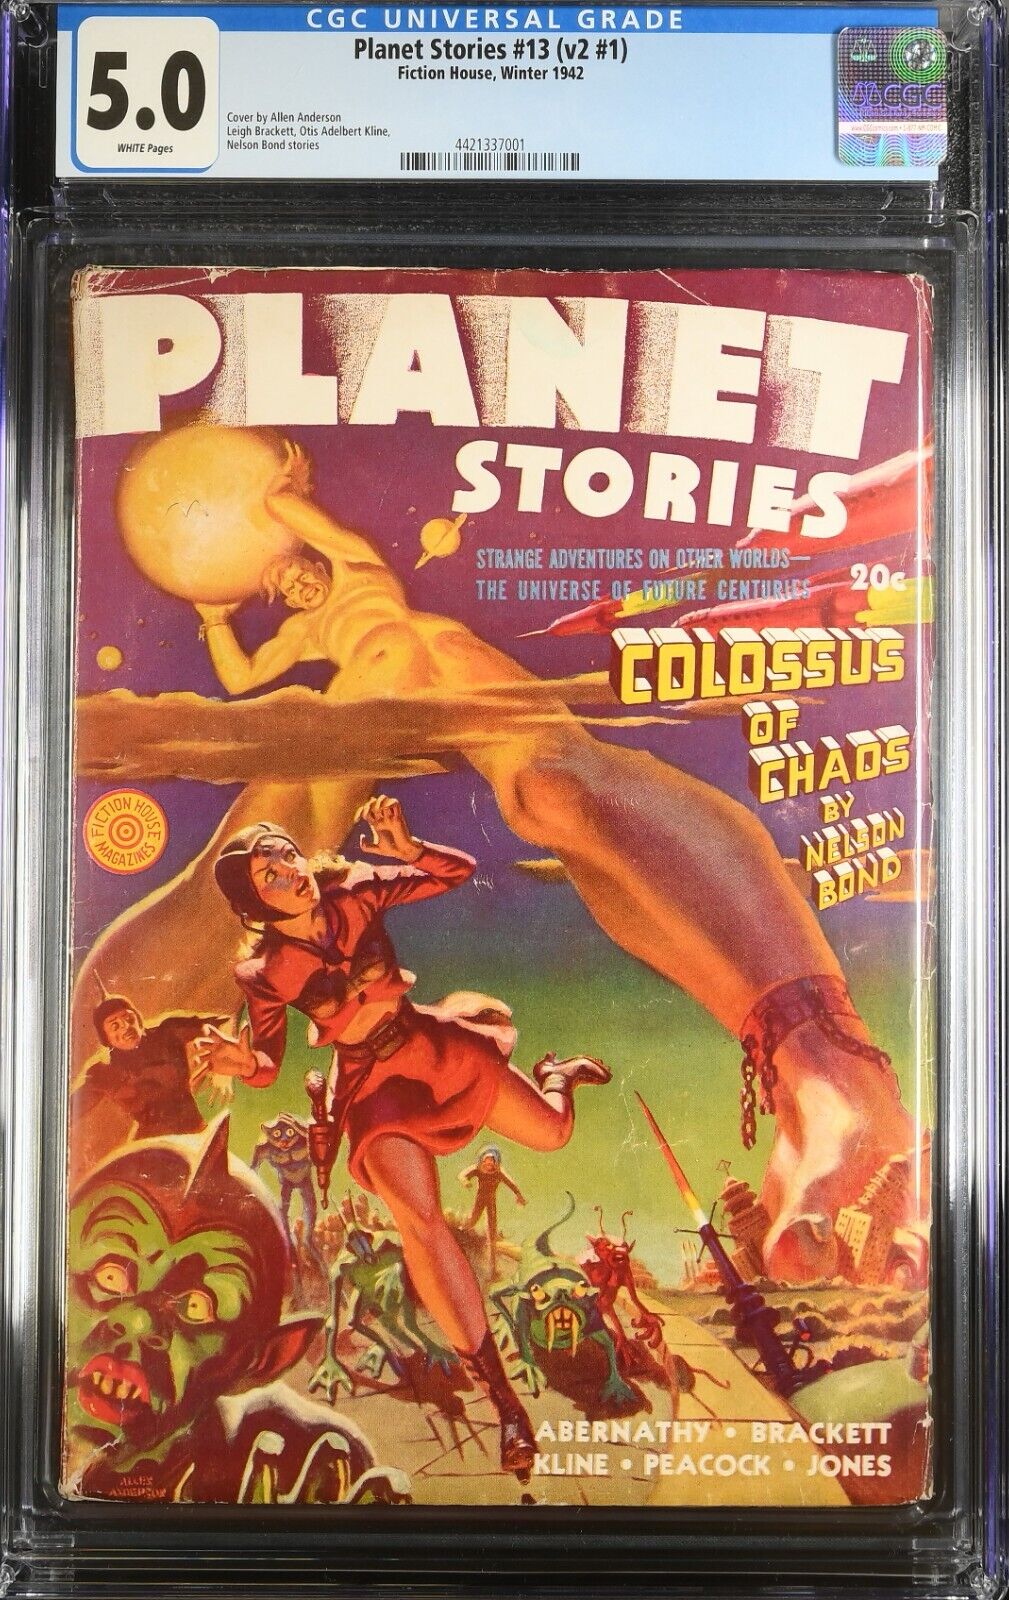 PLANET STORIES #13 (V2 #1) CGC 5.0 W PGS FICTION HOUSE WINTER 1942 PULP SCI-FI